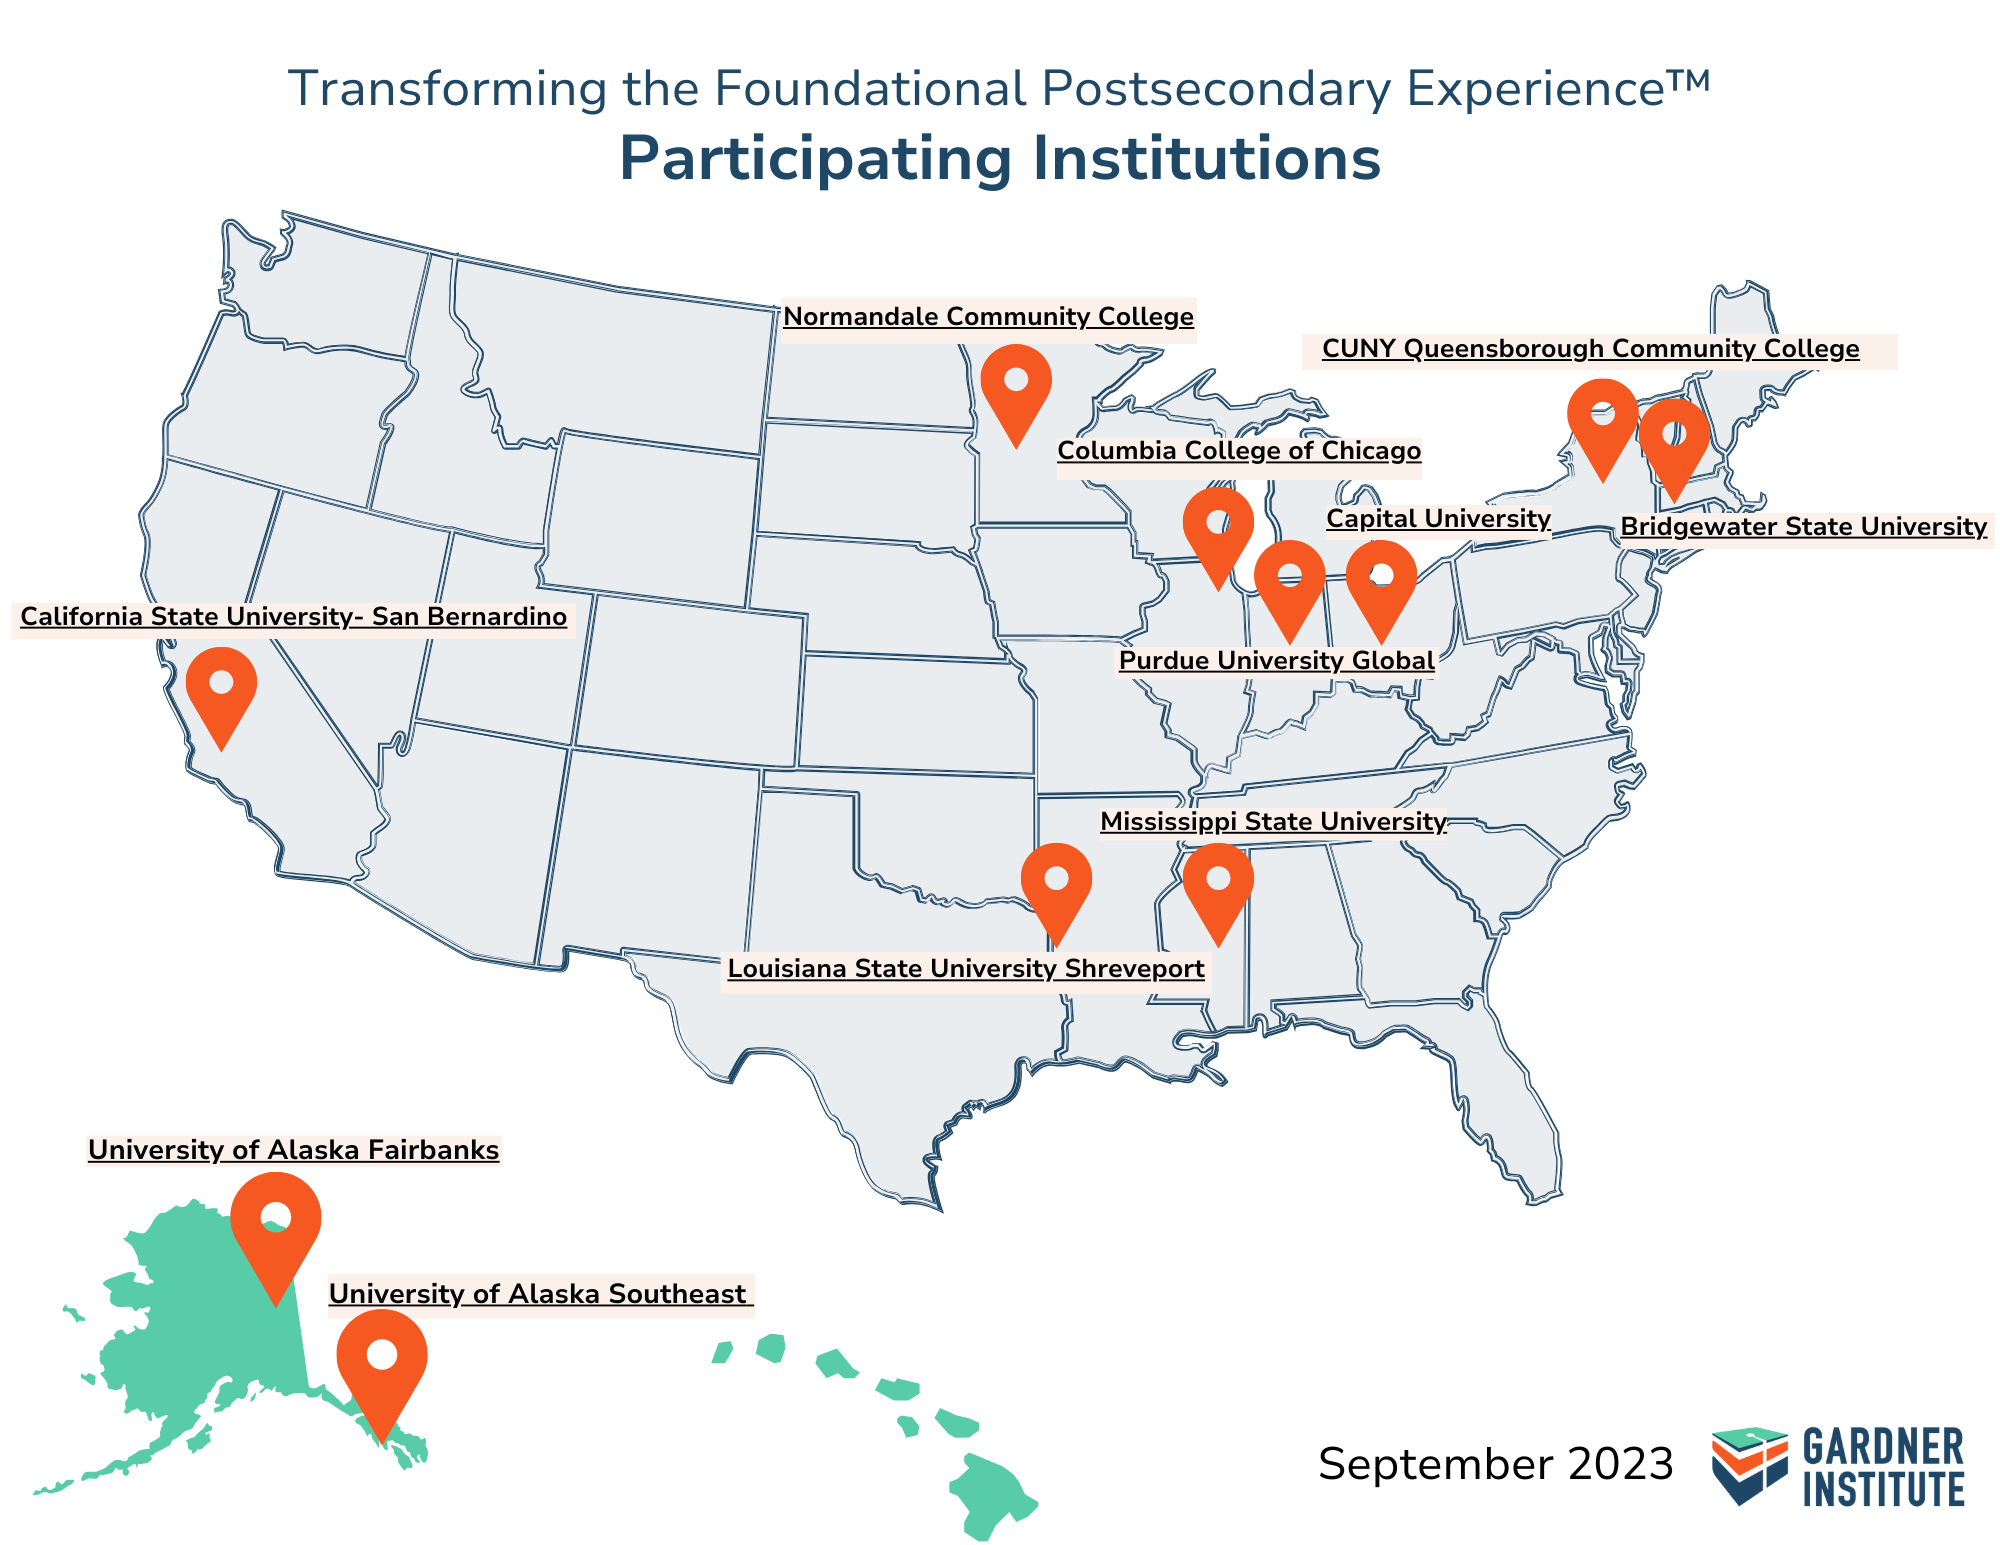 Map of Institutions participating in Transforming the Foundational Postsecondary Experience™